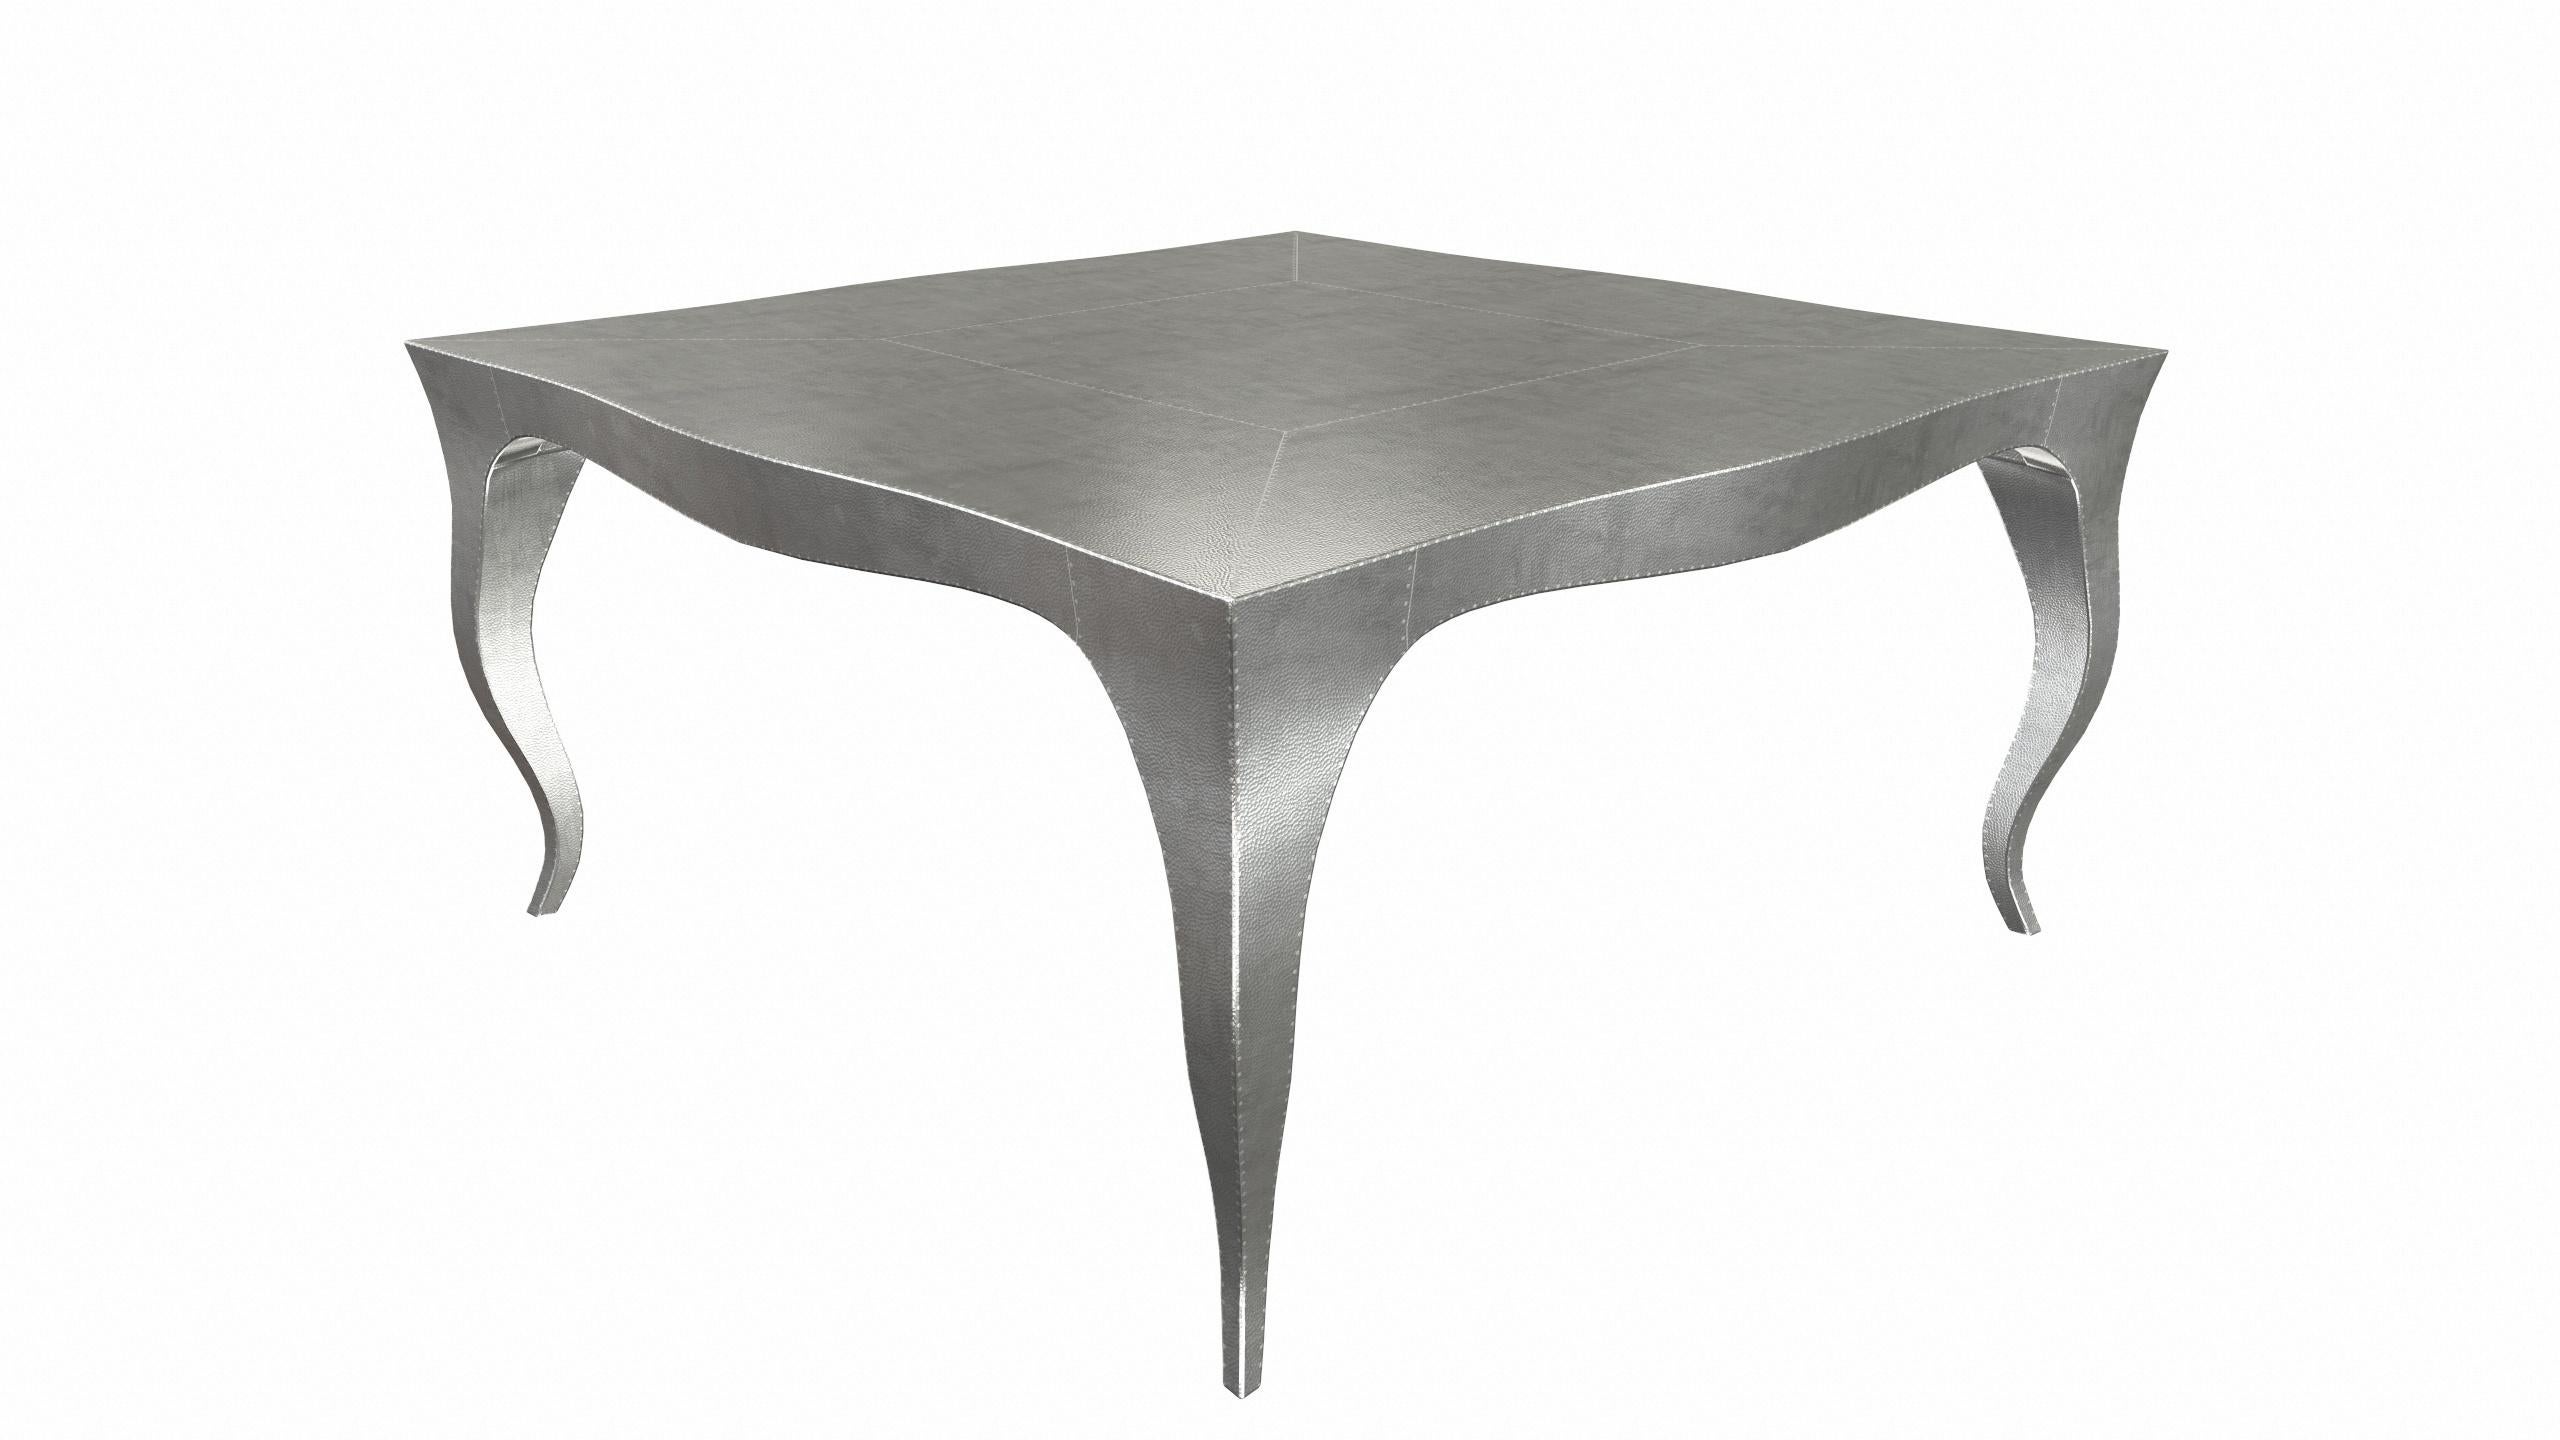 American Louise Art Deco Center Tables Mid. Hammered White Bronze by Paul Mathieu For Sale